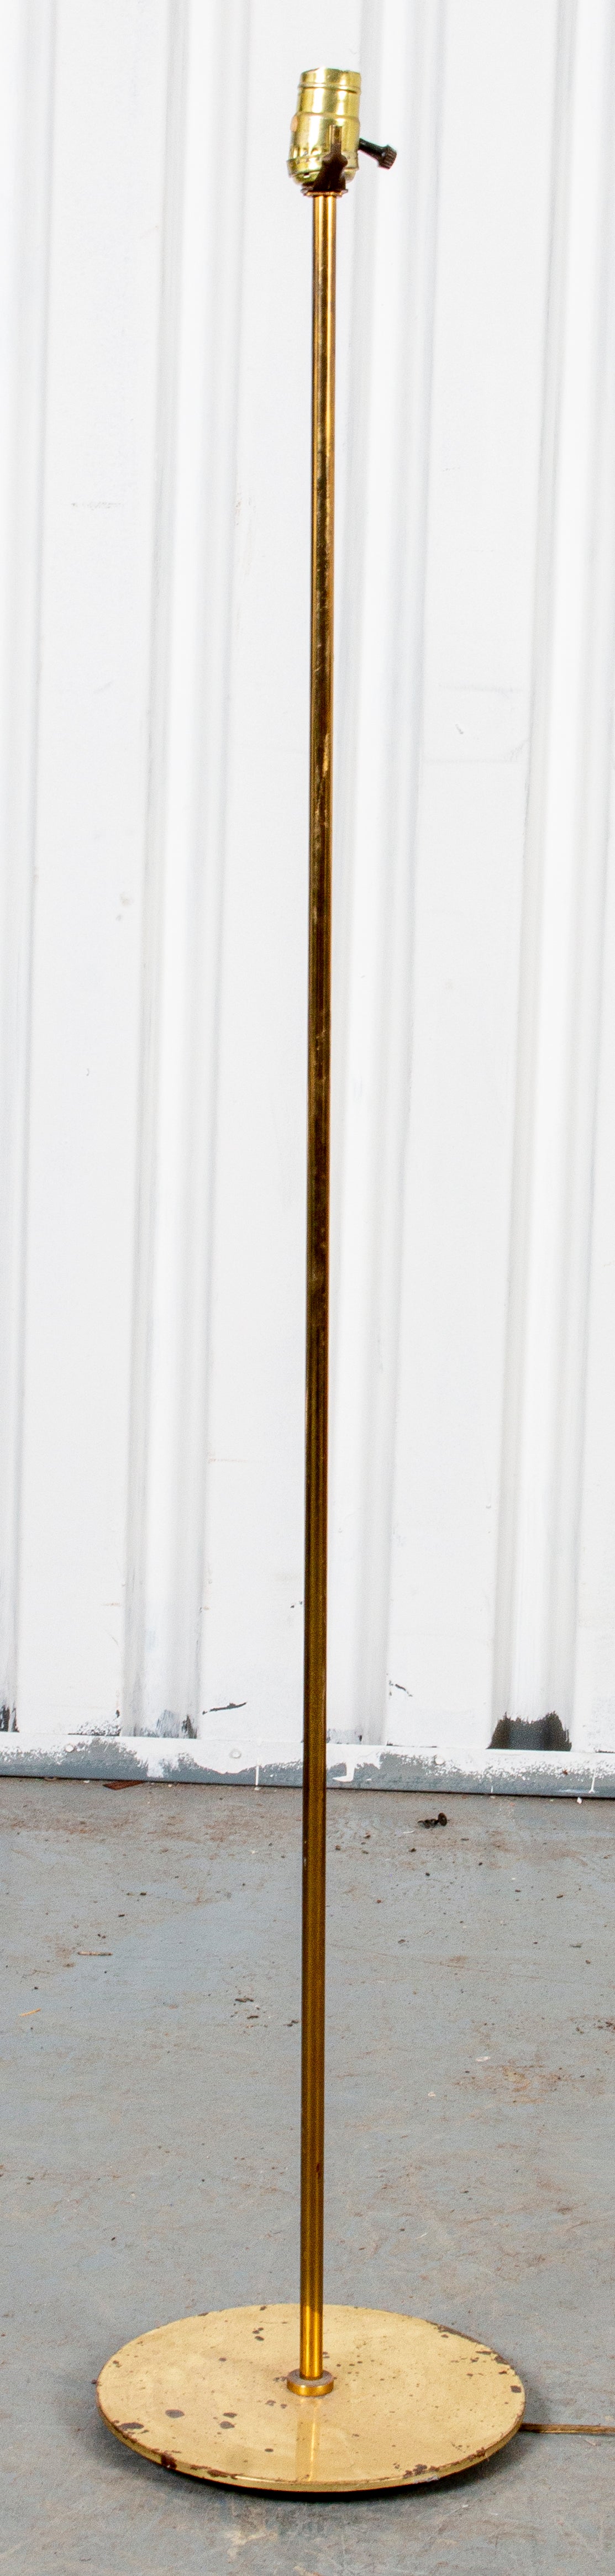 Modern brass standing floor lamp, (the base with corrosion)

Dimensions: 49